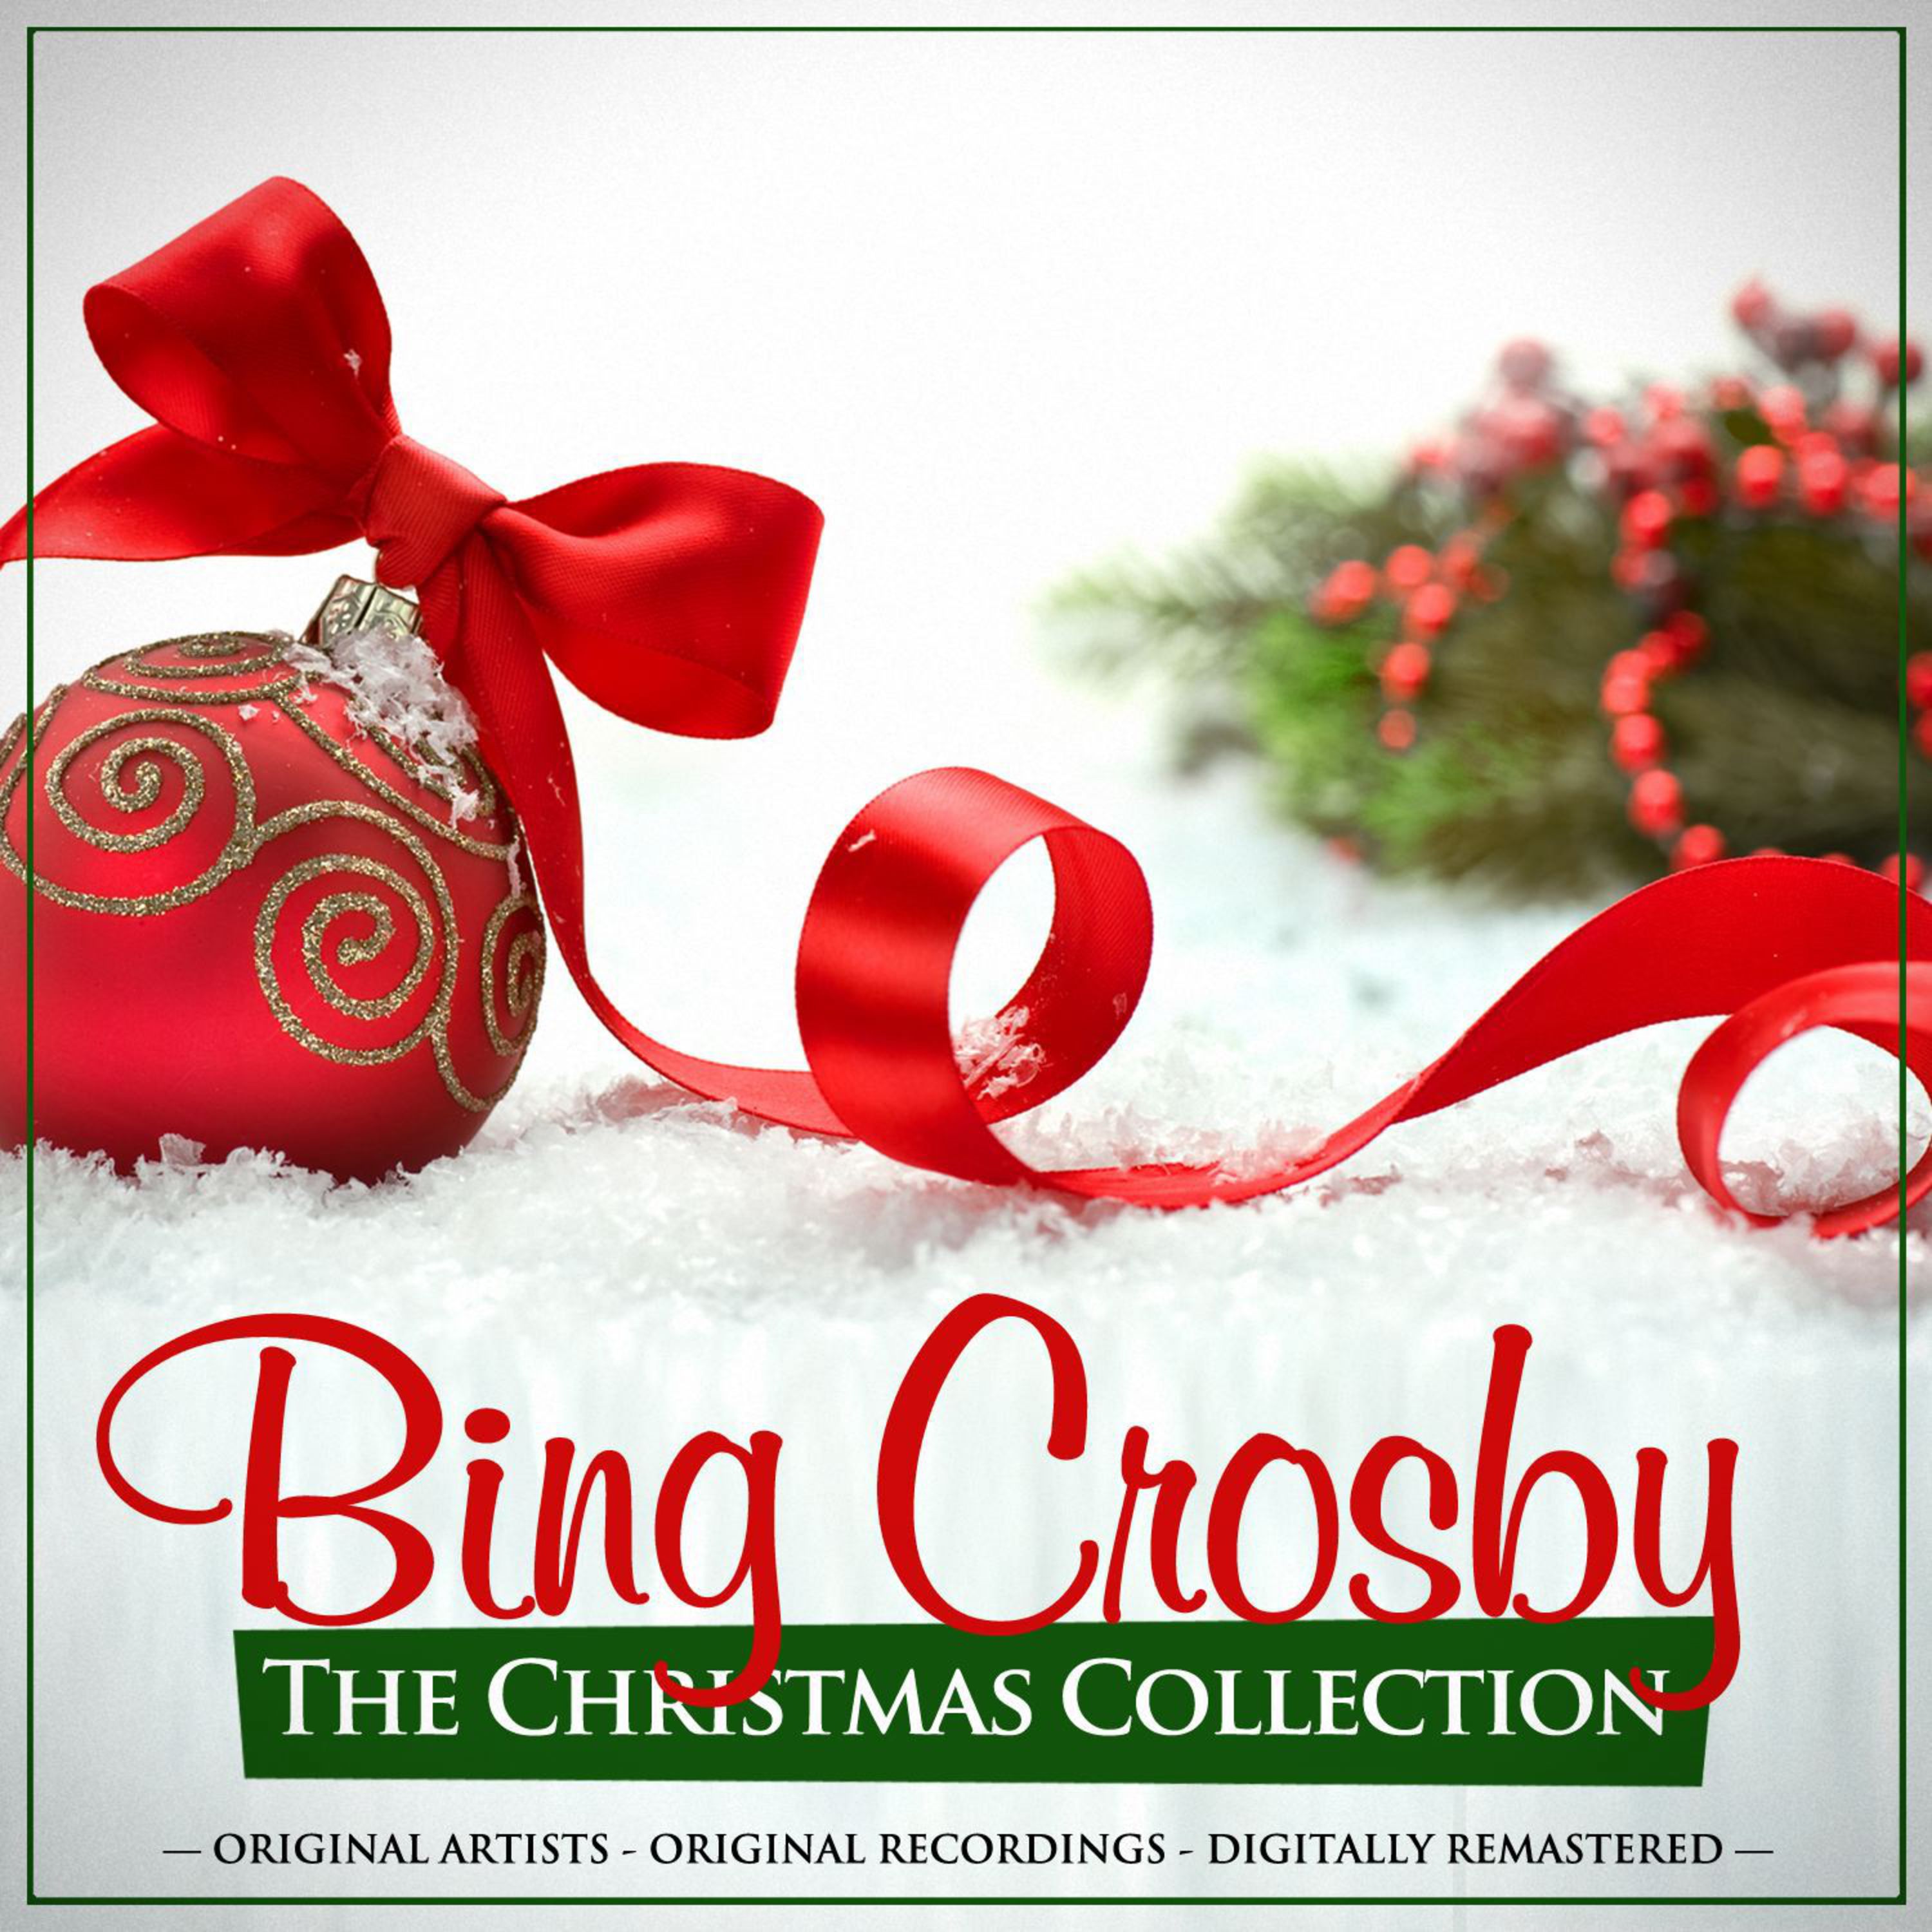 The Christmas Collection: Bing Crosby (Remastered)